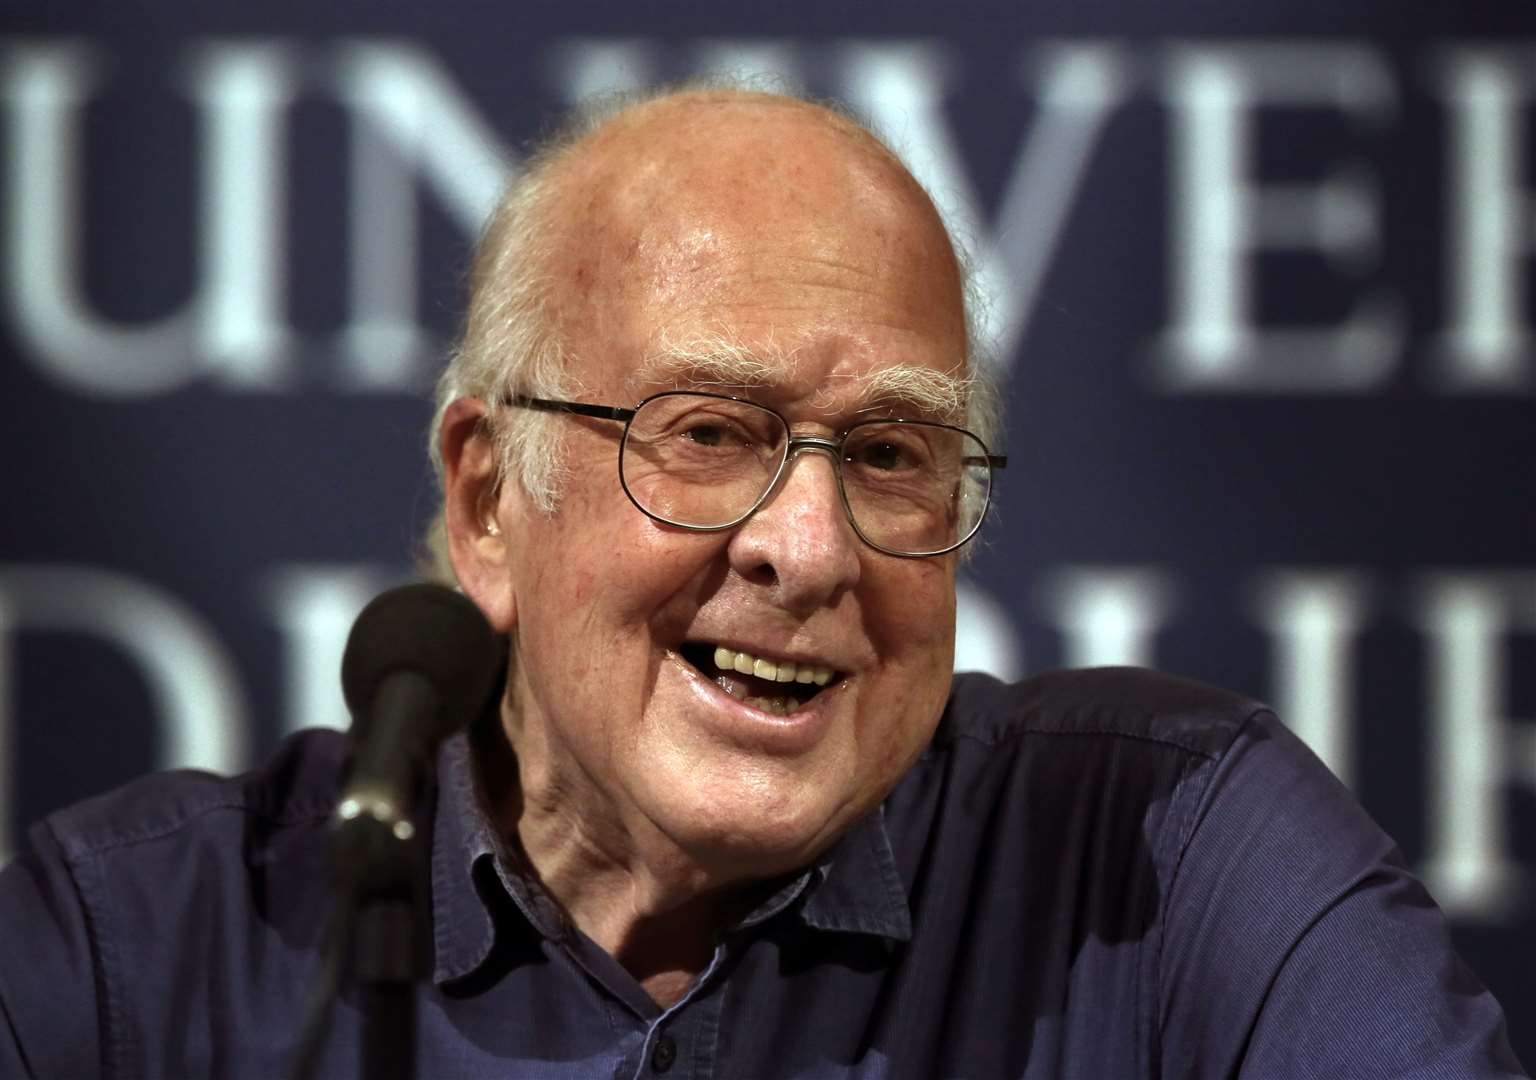 Prof Higgs speaking to the media at a press conference in Edinburgh after being awarded the Nobel Prize for Physics in 2013 (David Cheskin/PA)